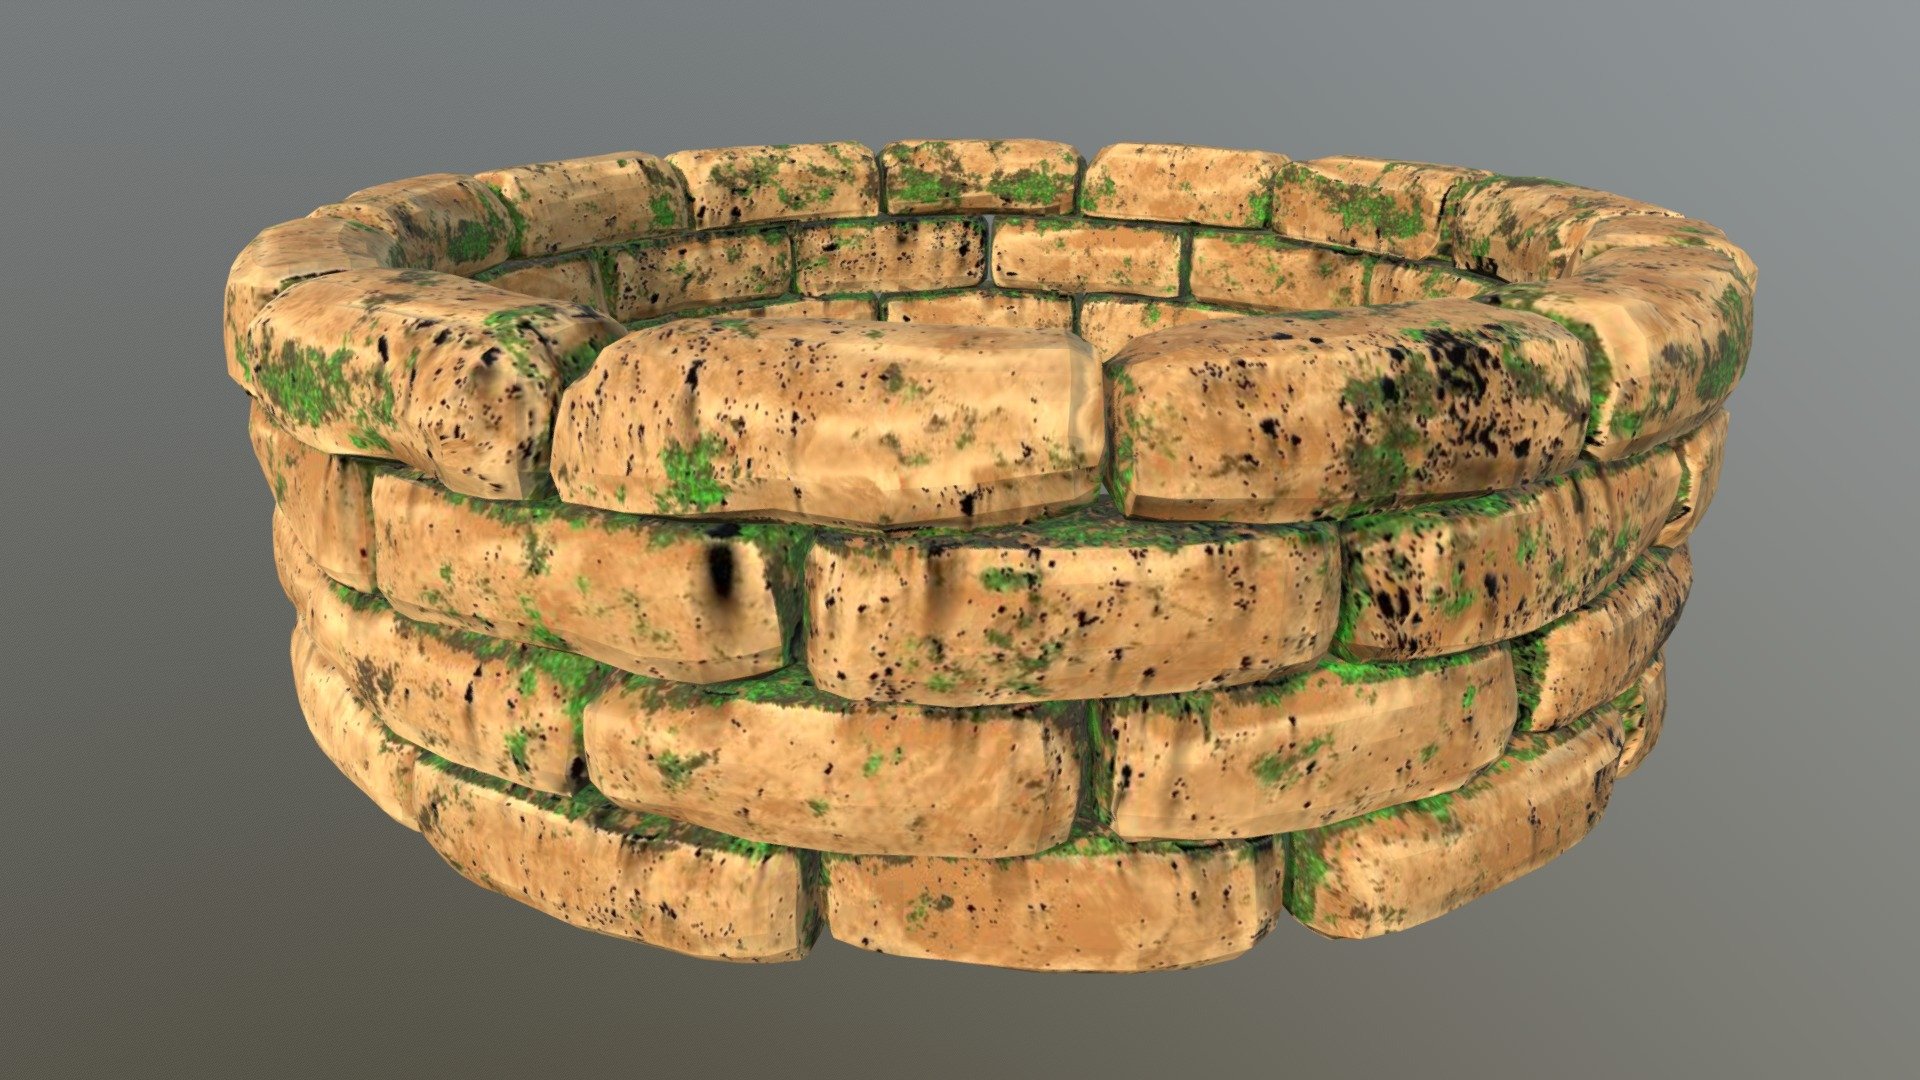 I made this well from High to Low-bake in Substance Painter. It was part of one of university courses. 

Anyone that want to download it and use it are very much welcome to do so 3d model